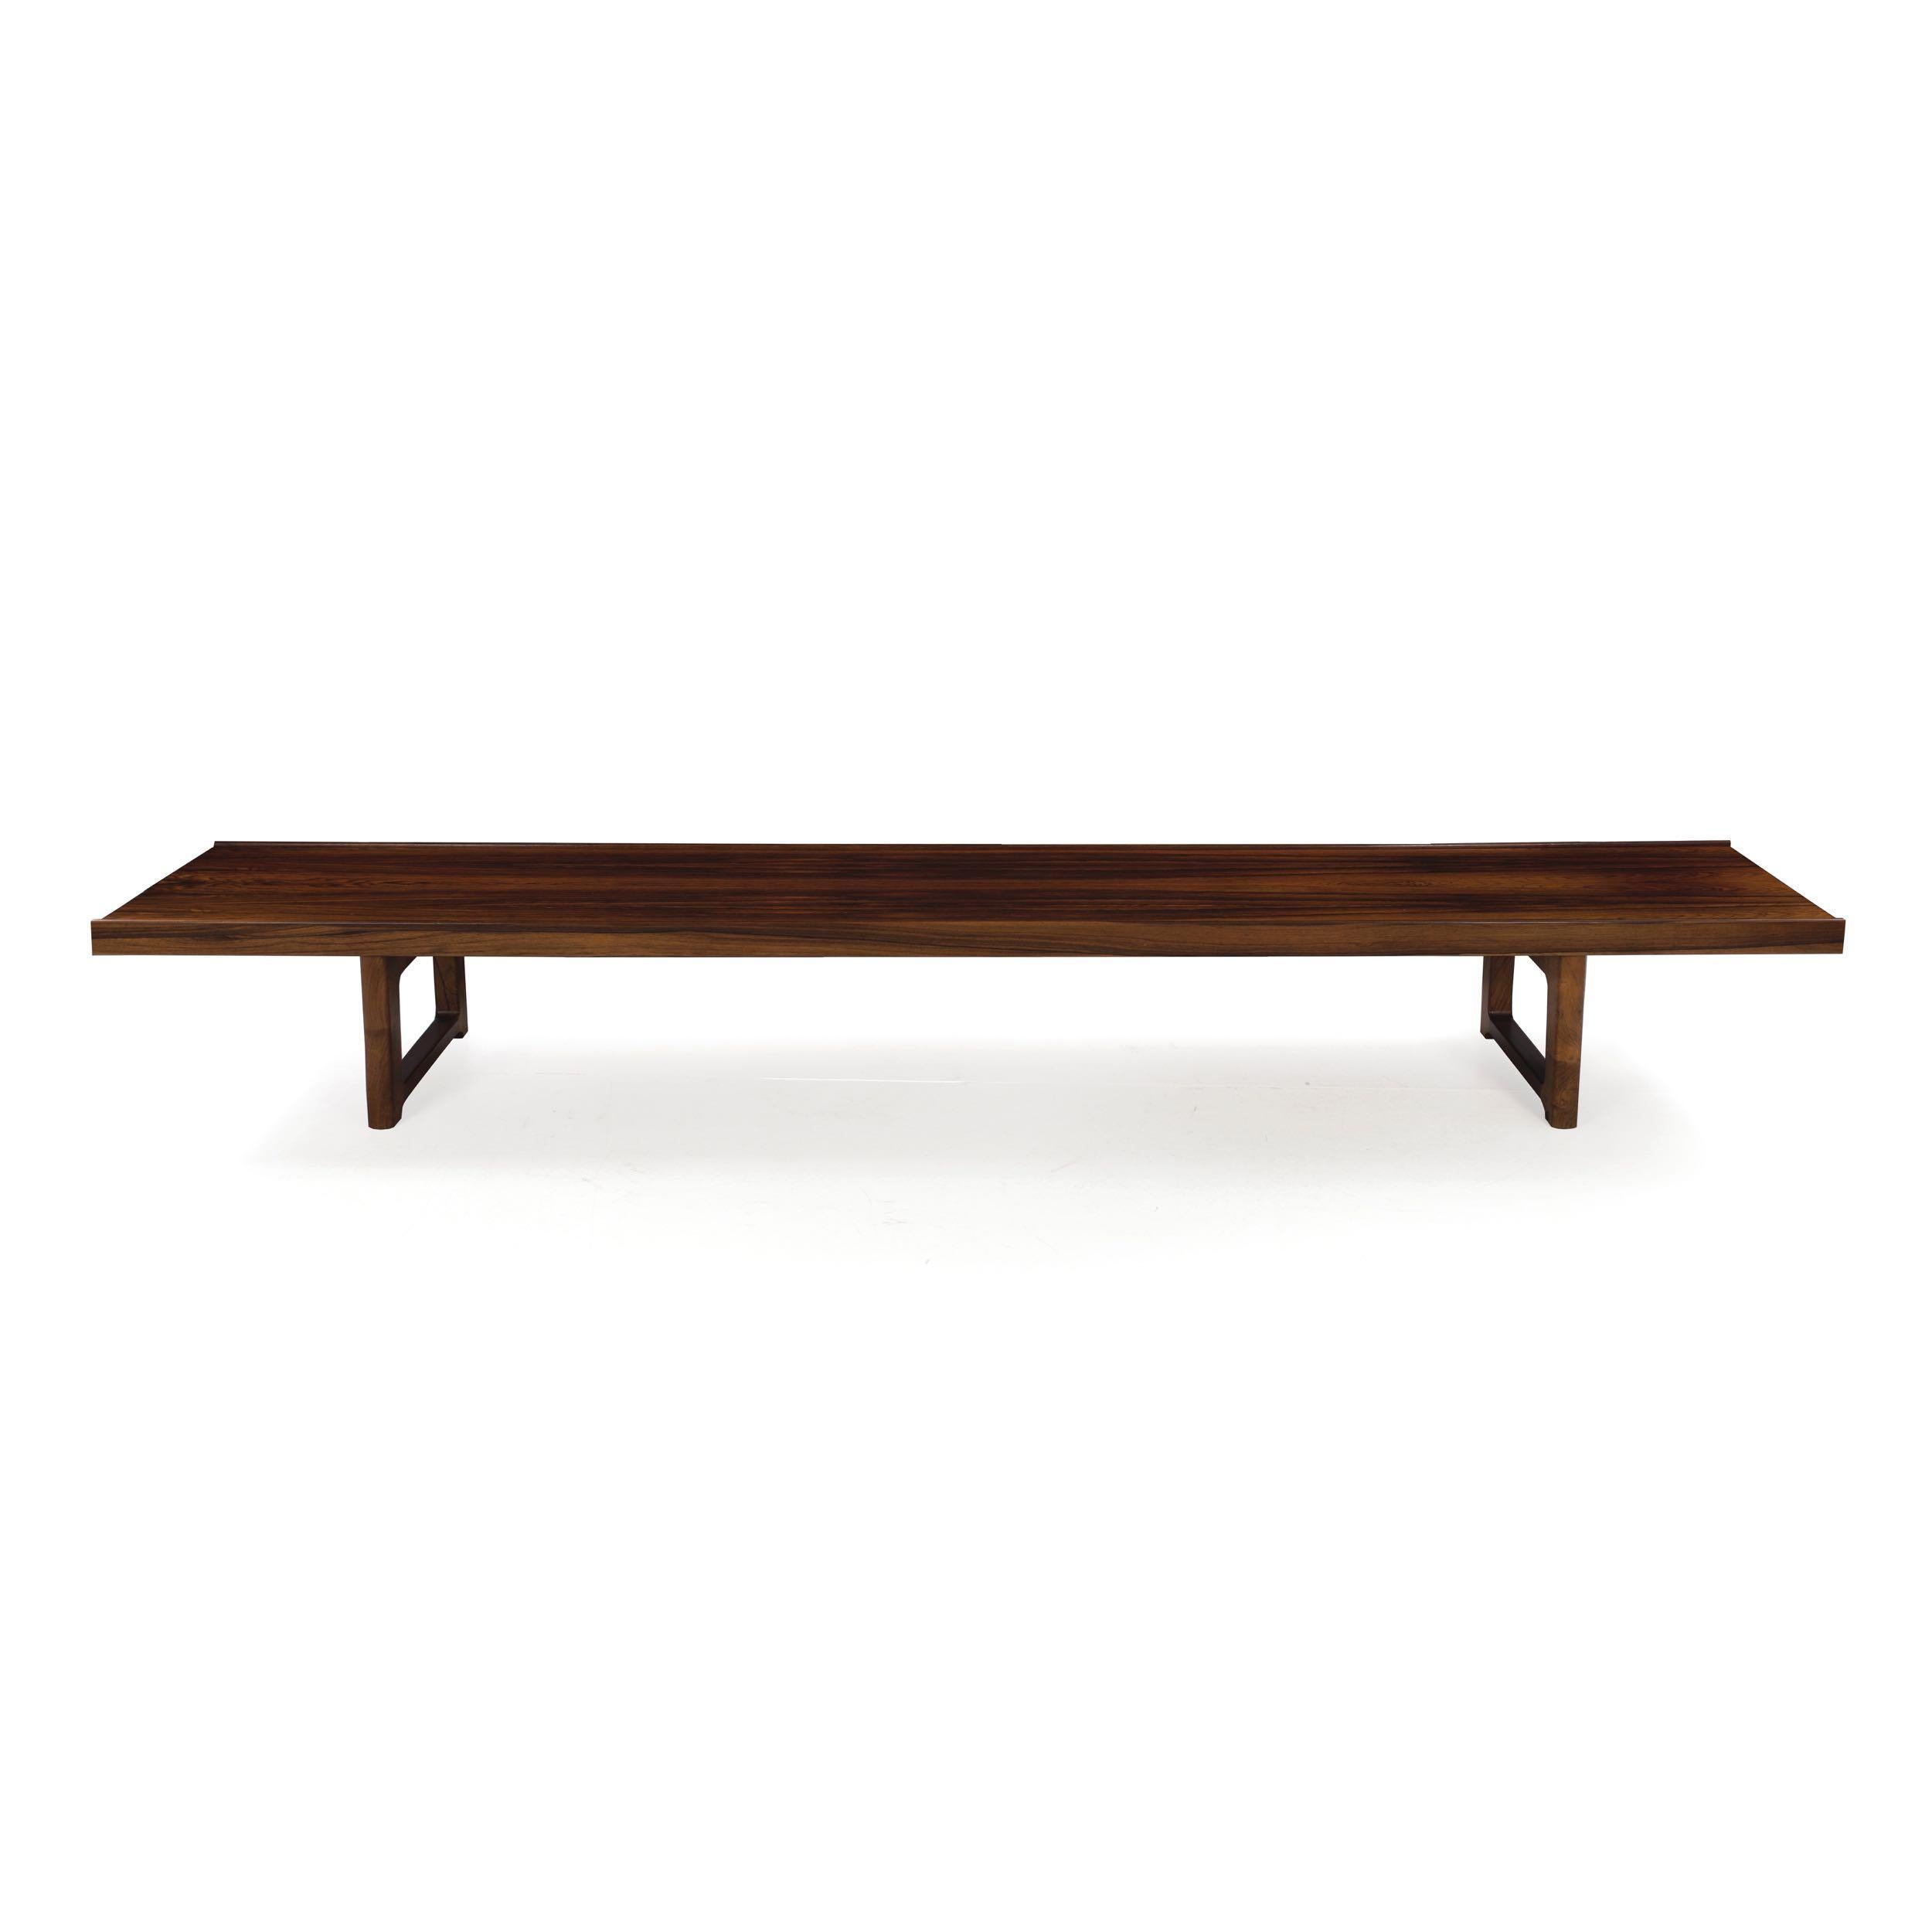 A handsome and versatile long bench designed by Torbjorn Afdal for Bruskbo and manufactured by Mellemstrands Trevareindustri SA of Norway, it is part of a series of benches titled 